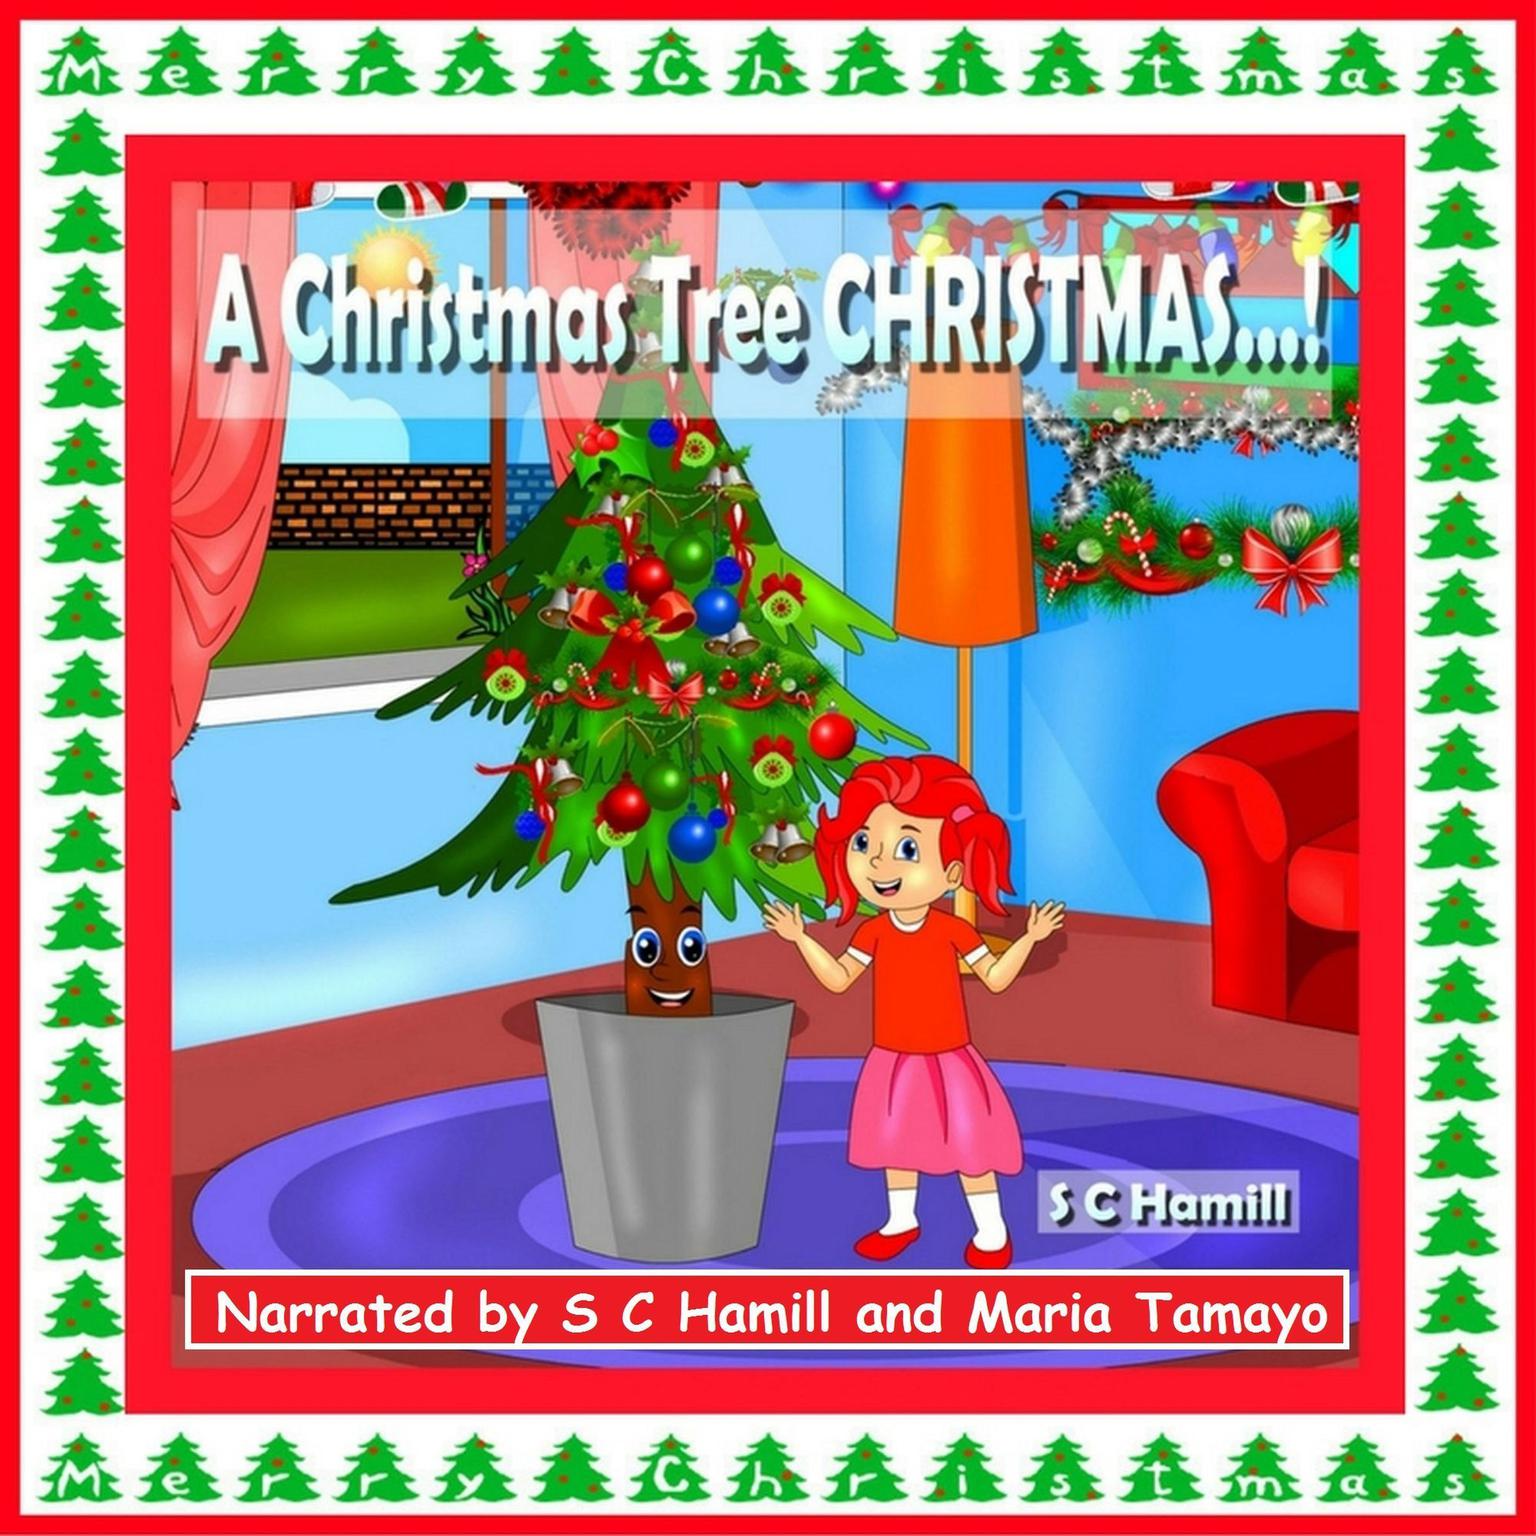 A Christmas Tree CHRISTMAS…! Audiobook, by S. C. Hamill